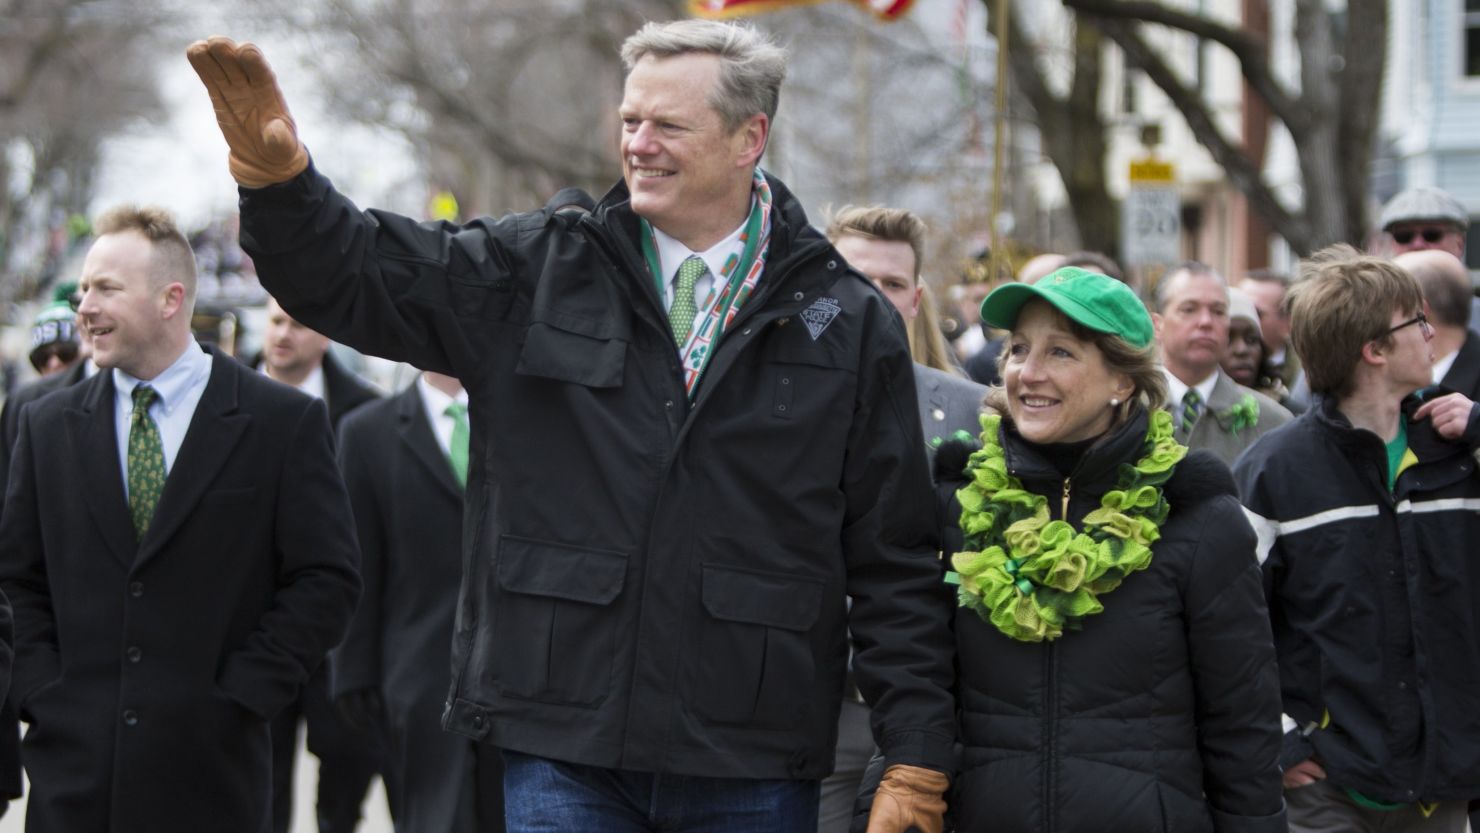 Governor Charlie Baker of Massachusetts and wife Lauren Baker march in the annual South Boston St. Patrick's Parade on March 20, 2016.